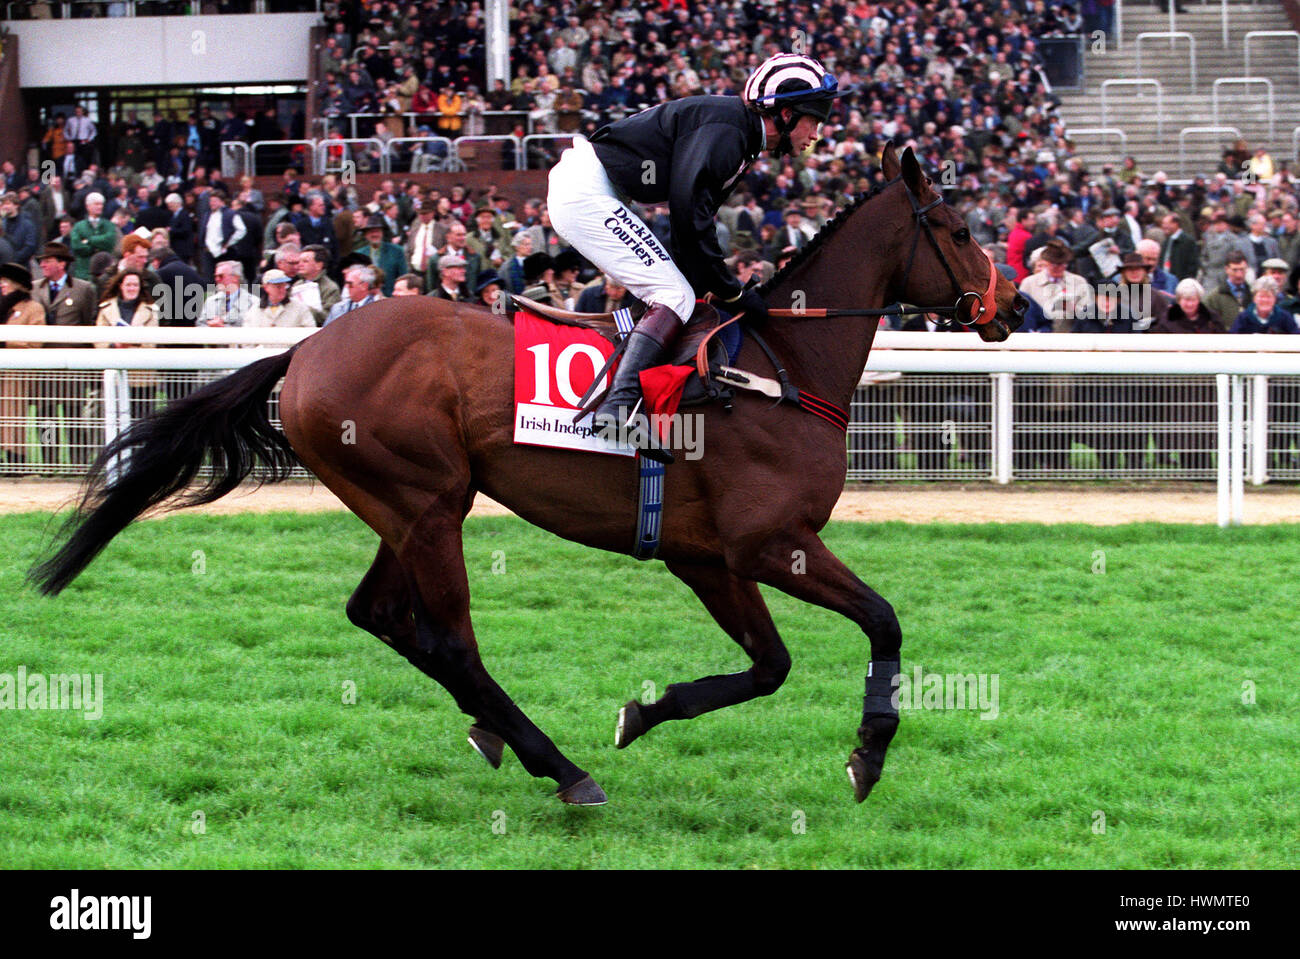 WAKEEL RIDDEN BY CARL LLEWELLYN 14 March 2000 Stock Photo